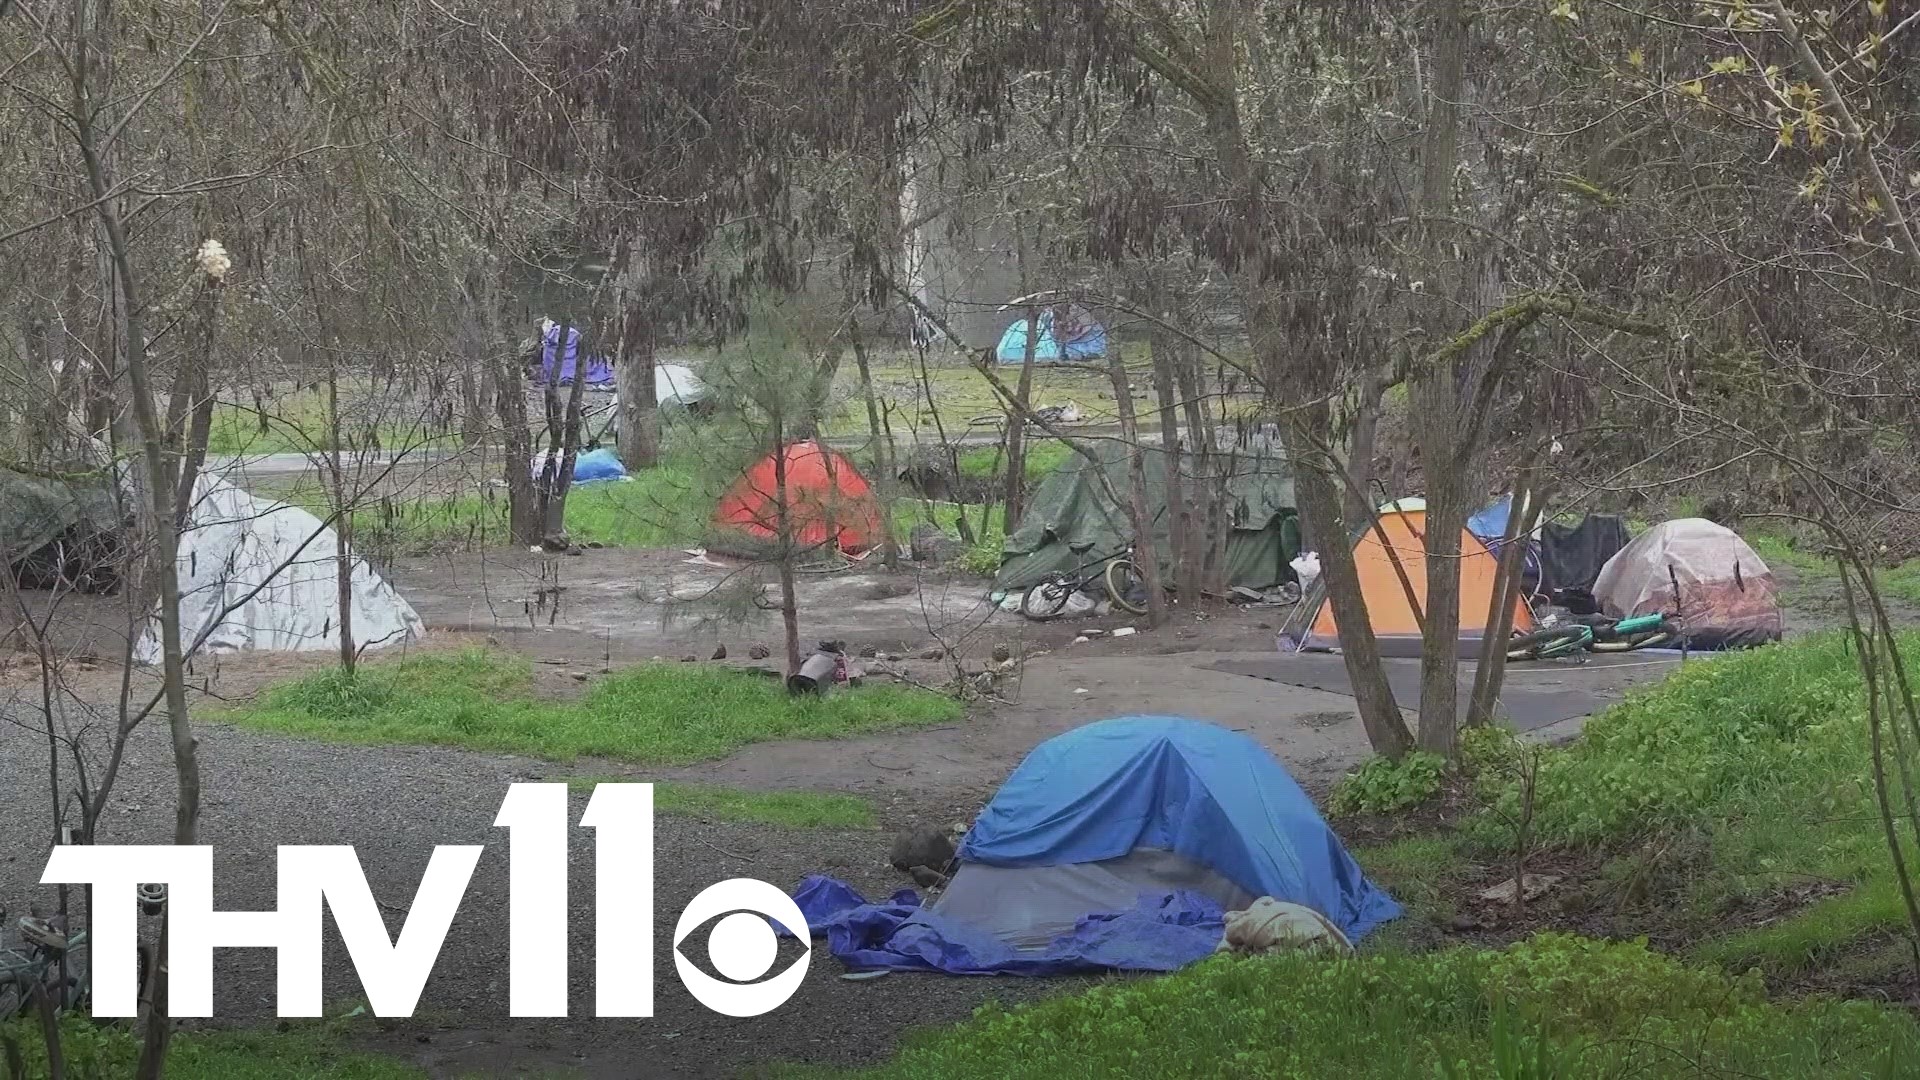 As homelessness in the U.S. rises, states have split on how to address the crisis, with some citing homeless people for sleeping outdoors.